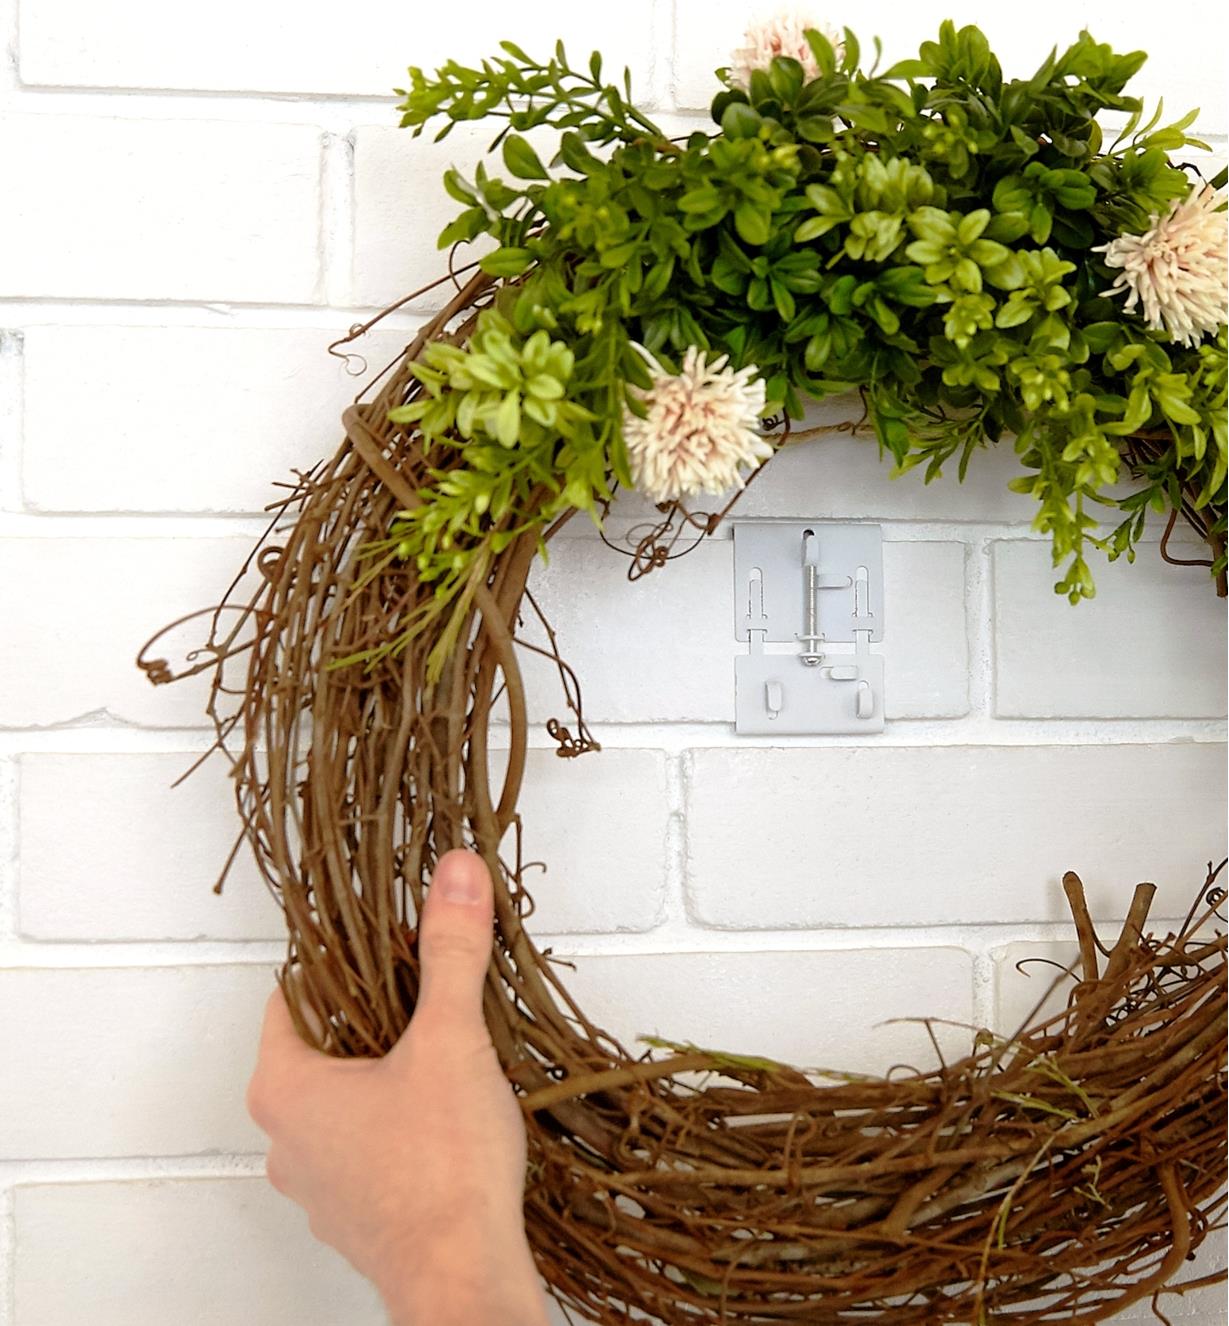 A wreath is hung on a brick wall with a brick clamp that is painted to match the wall